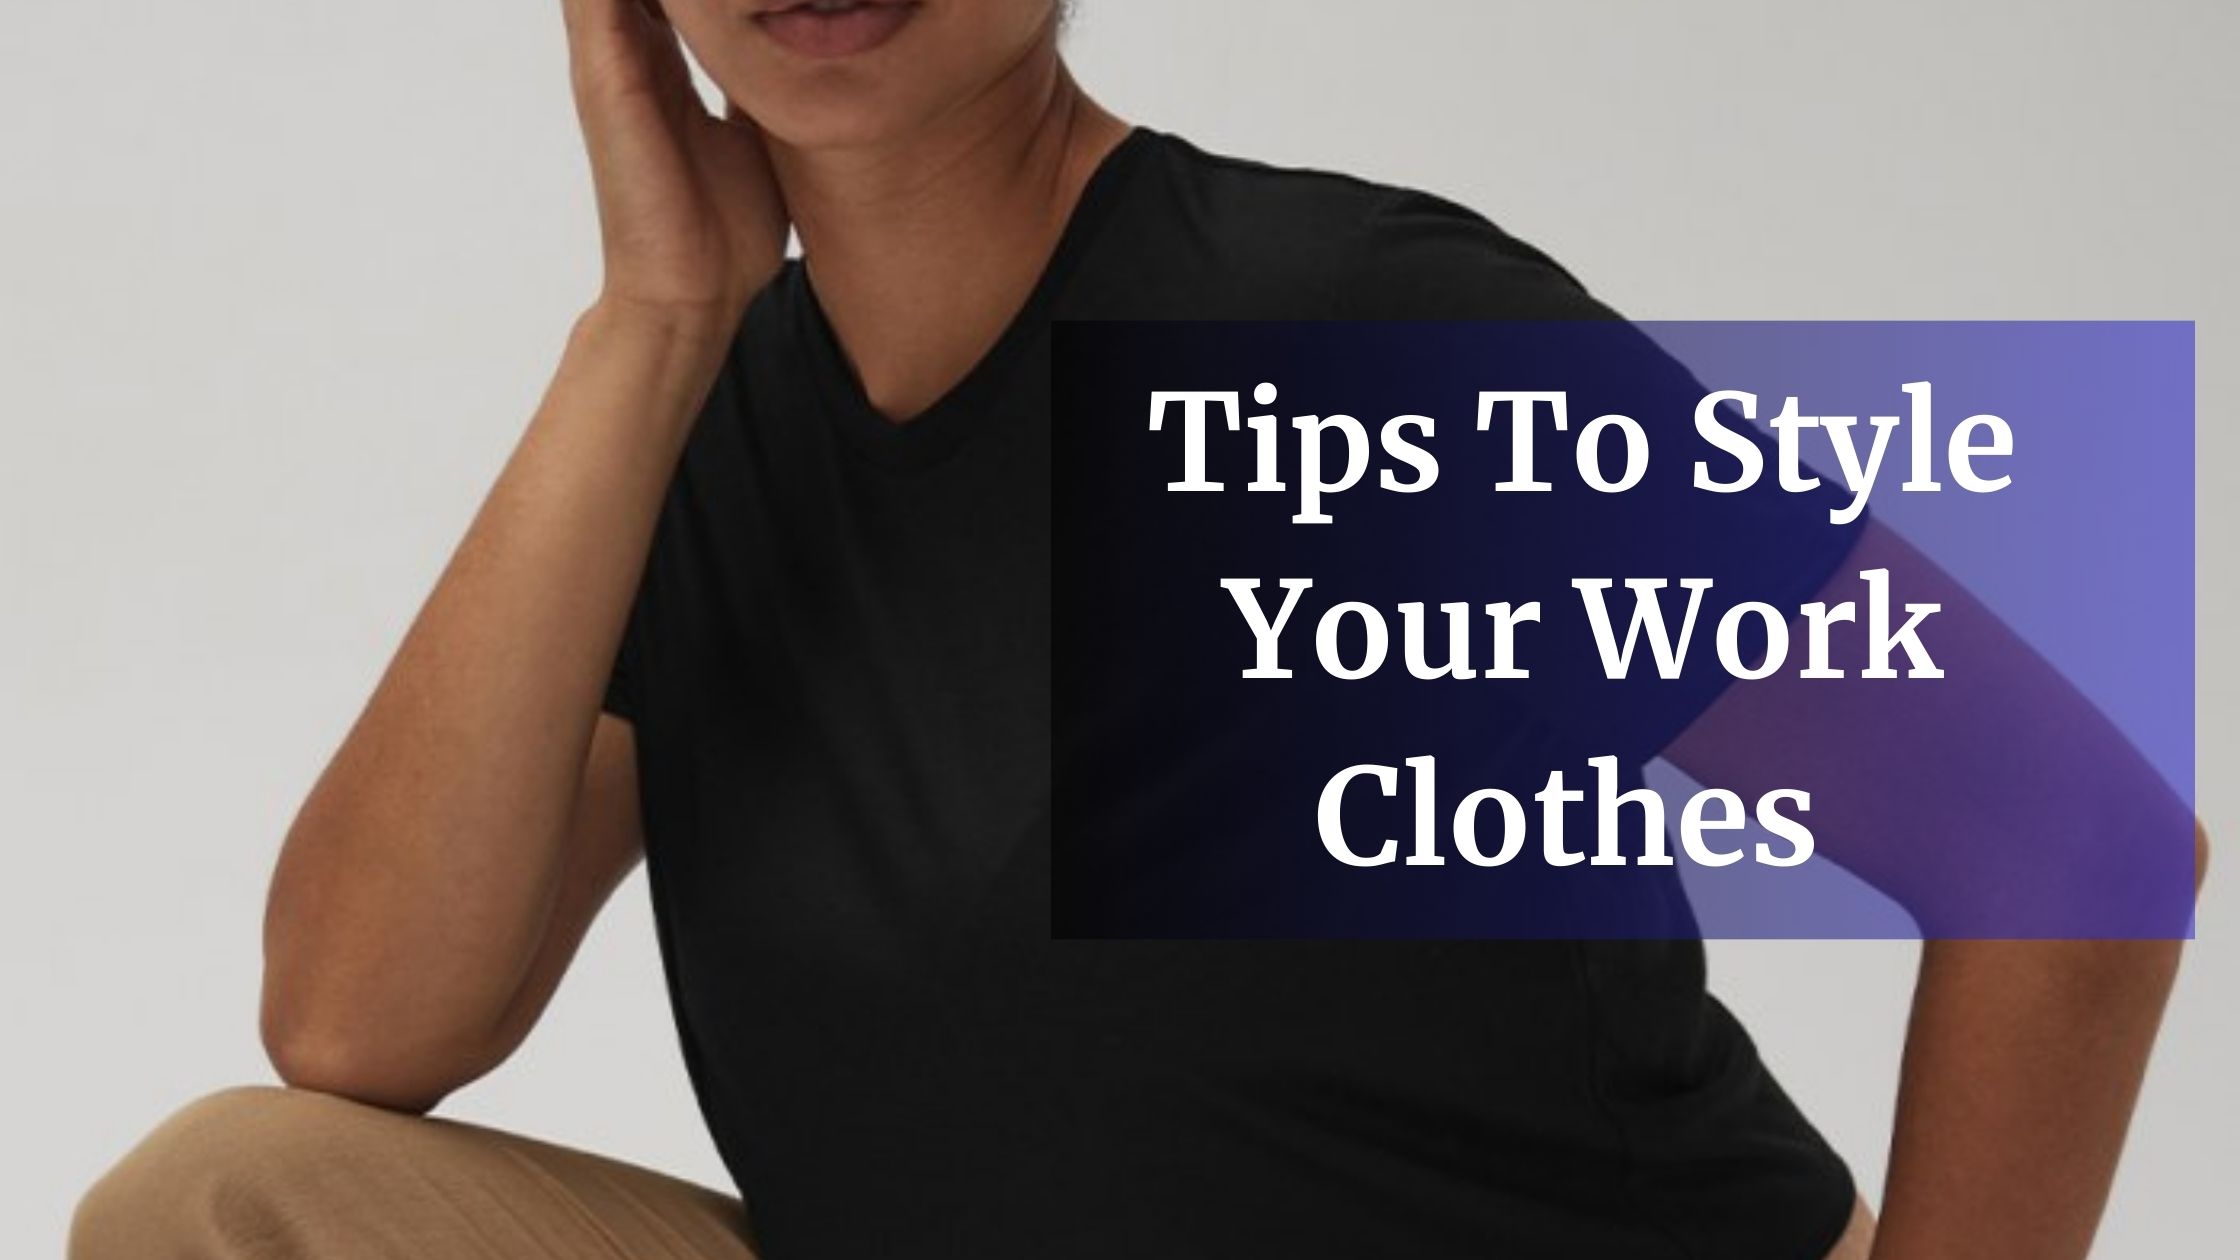 Tips To Style Your Work Clothes